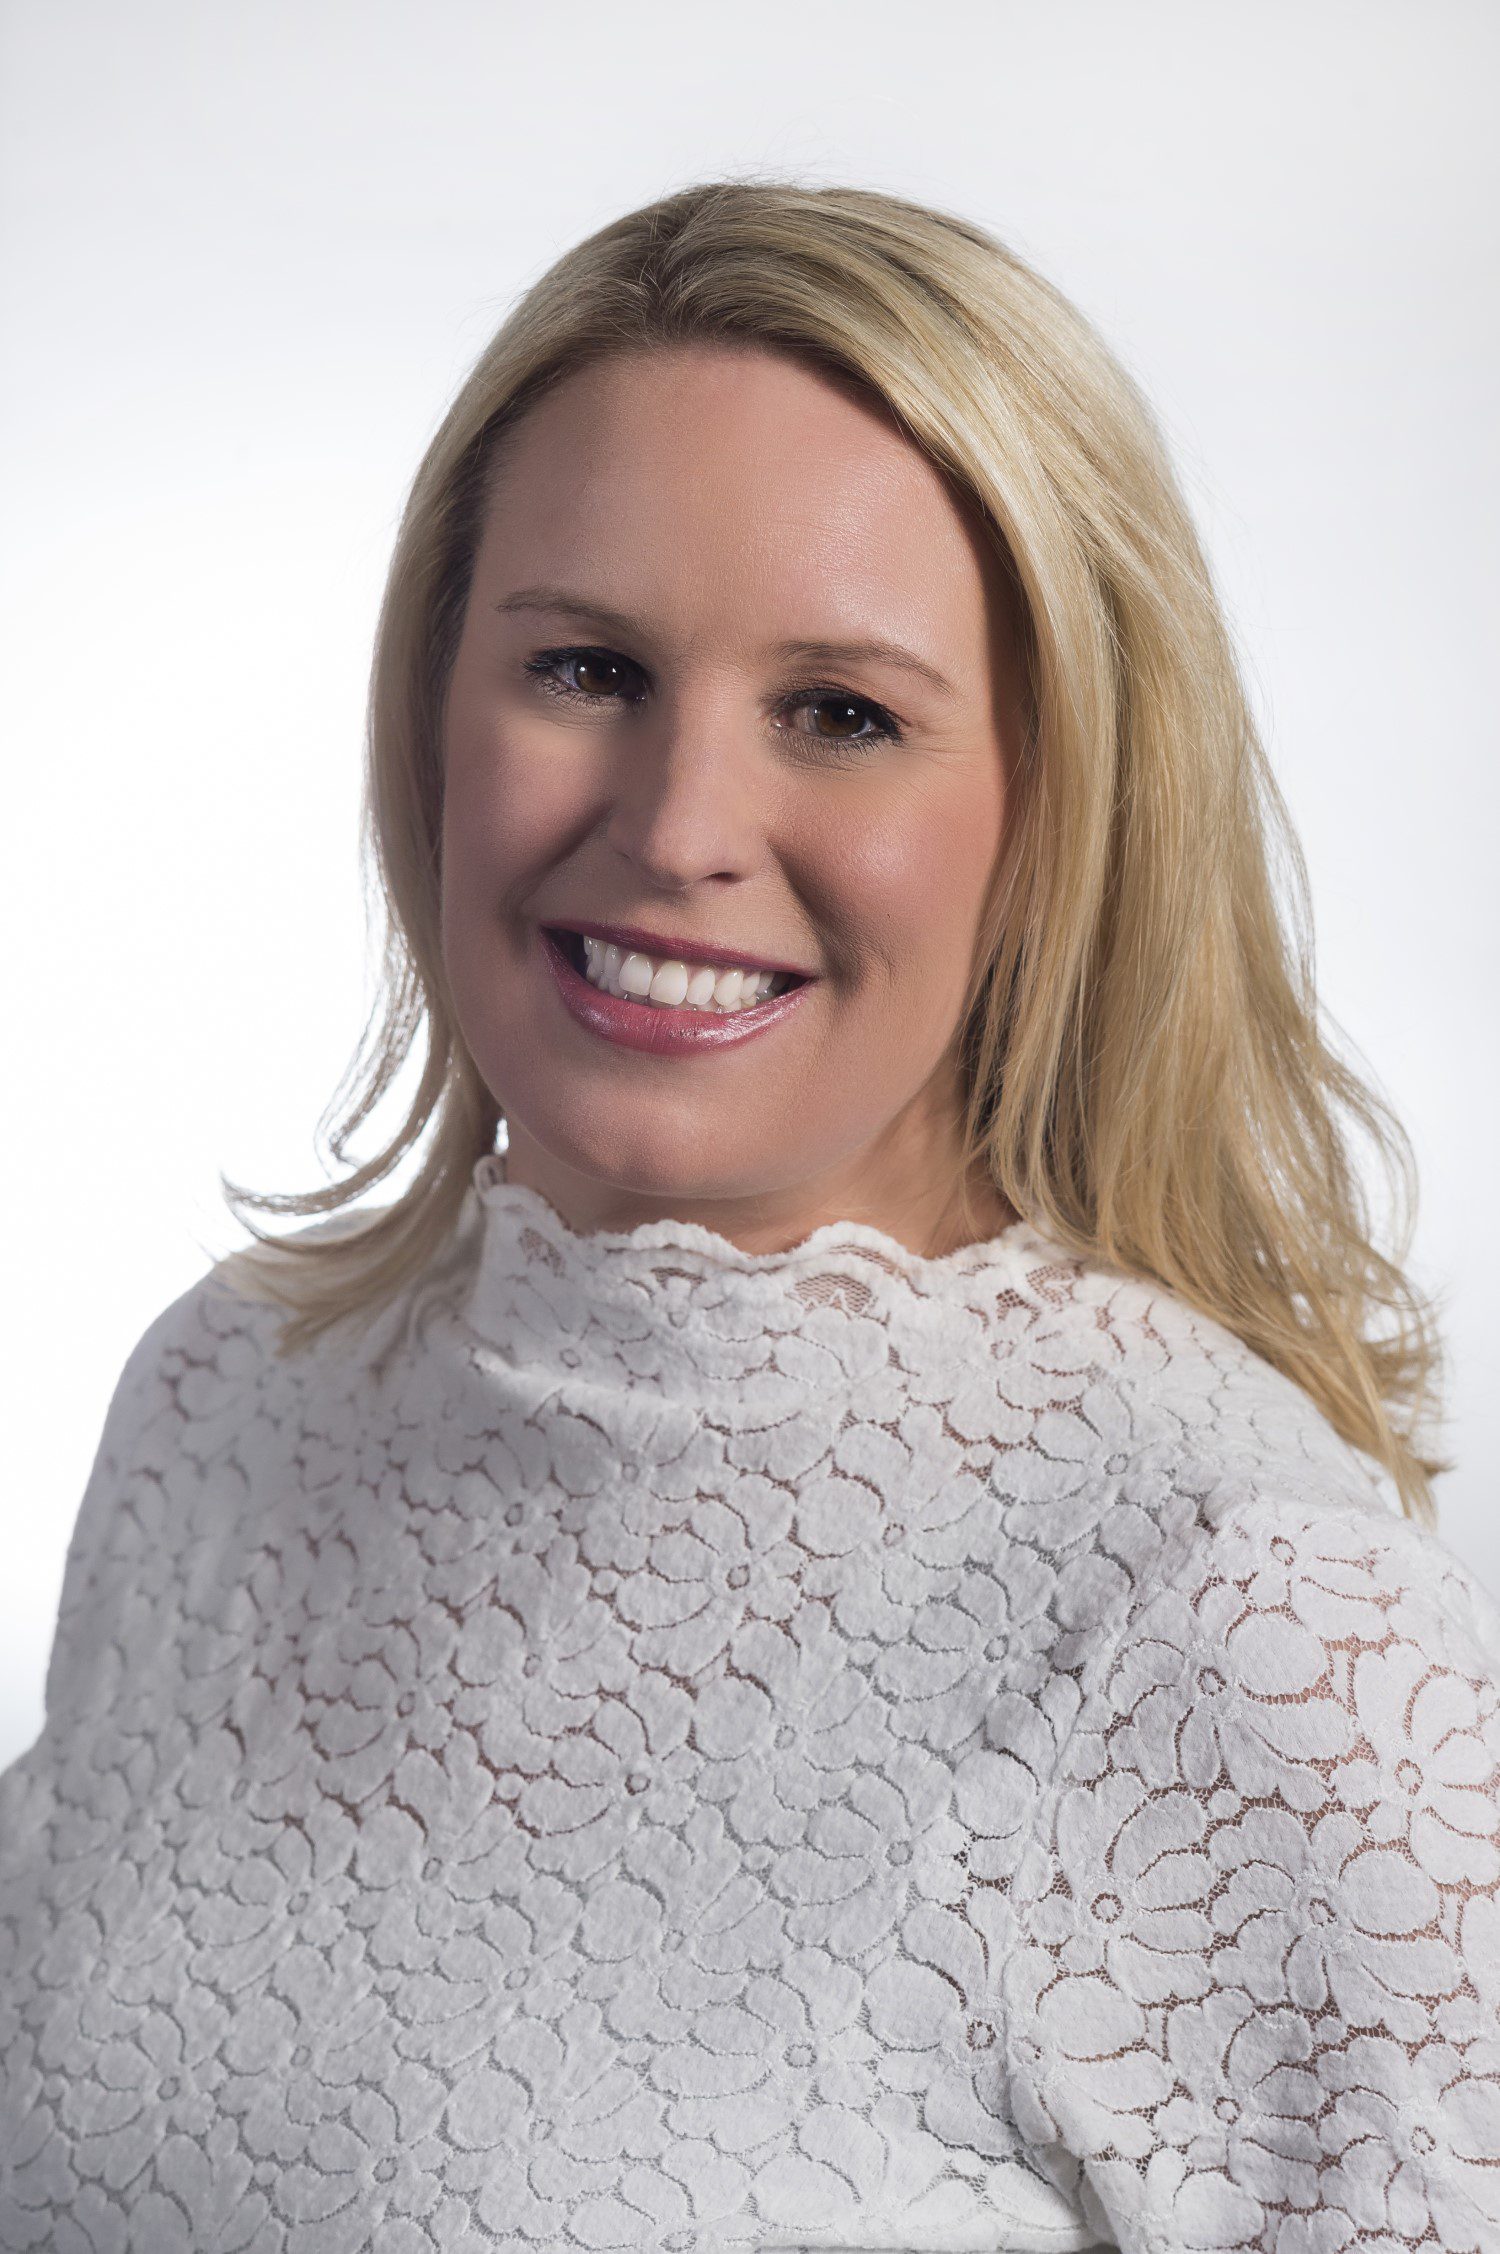 A headshot of Collette Travel CEO and President Jaclyn Leibl-Cote wearing a lace blouse.